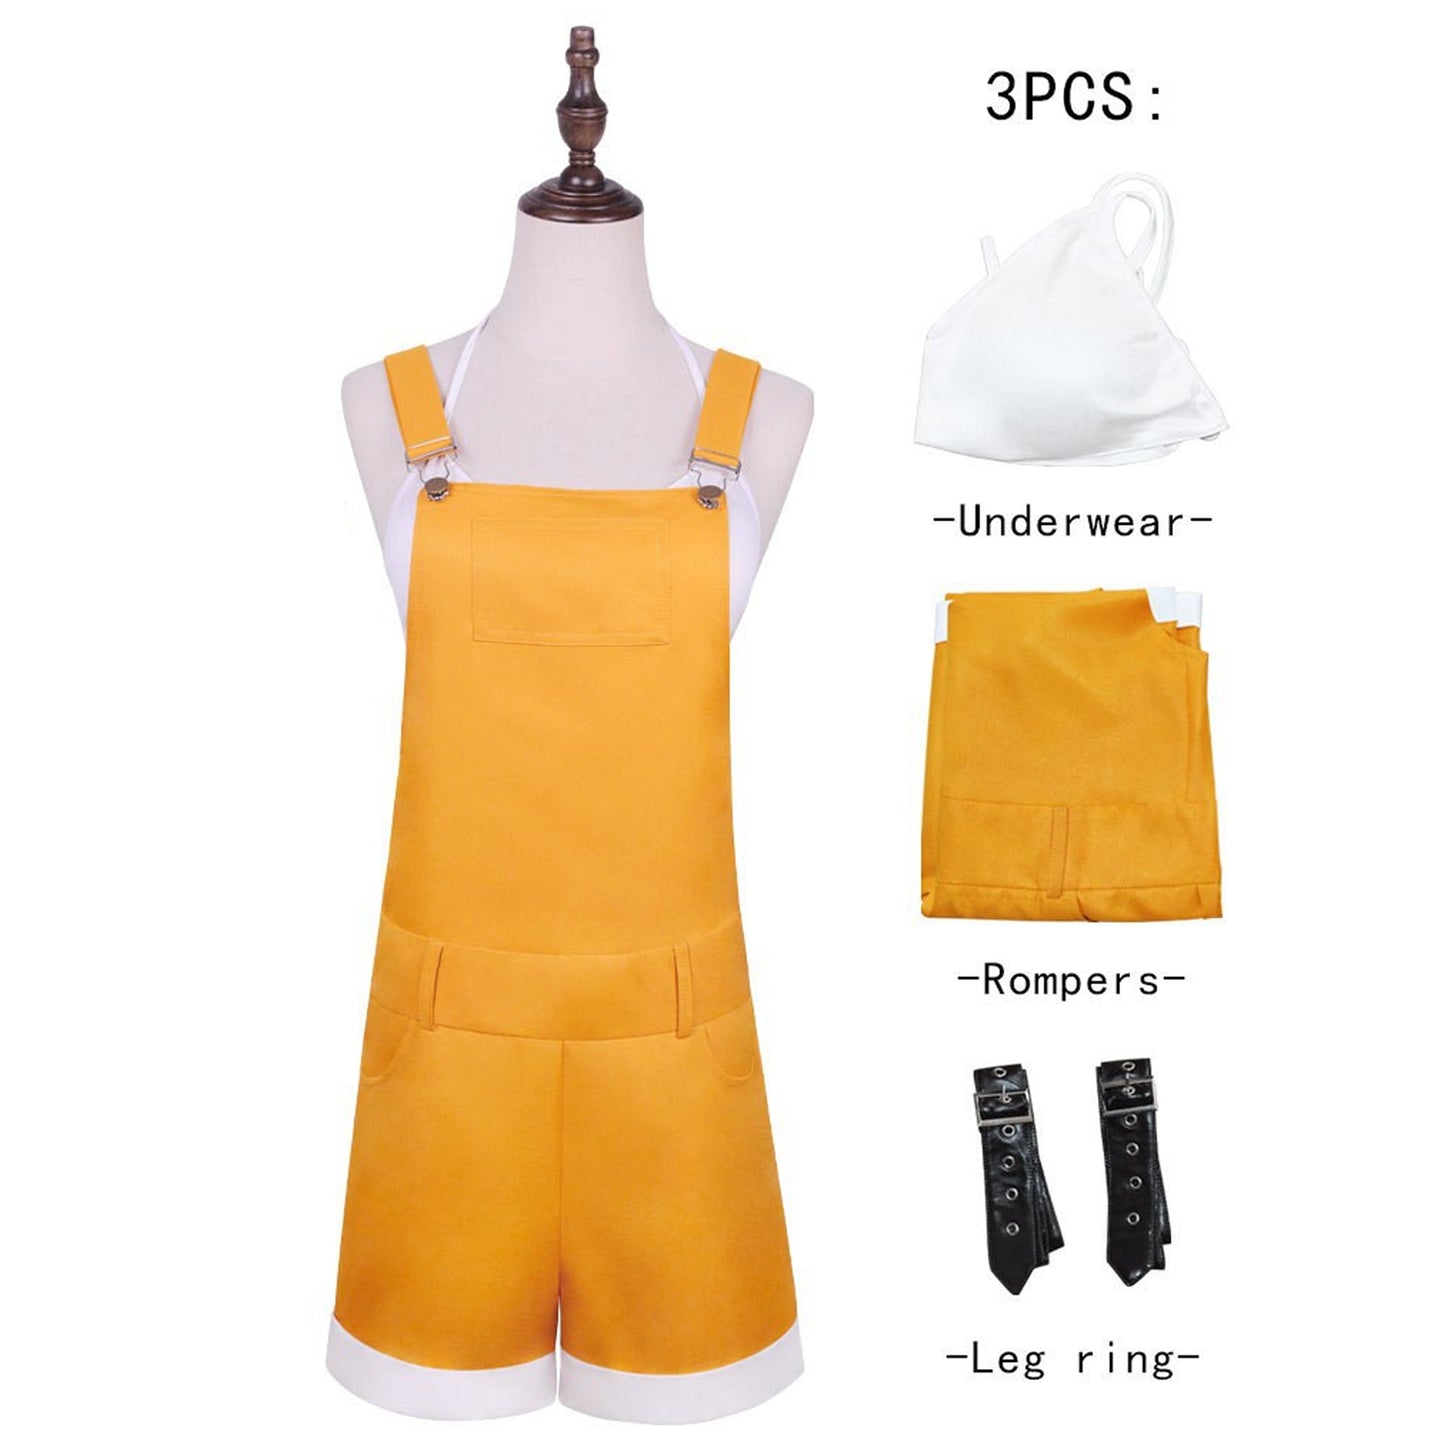 Adult Nami Cosplay Costume Japenese Anime Nami Outfits Suspenders Romper Halloween Costume